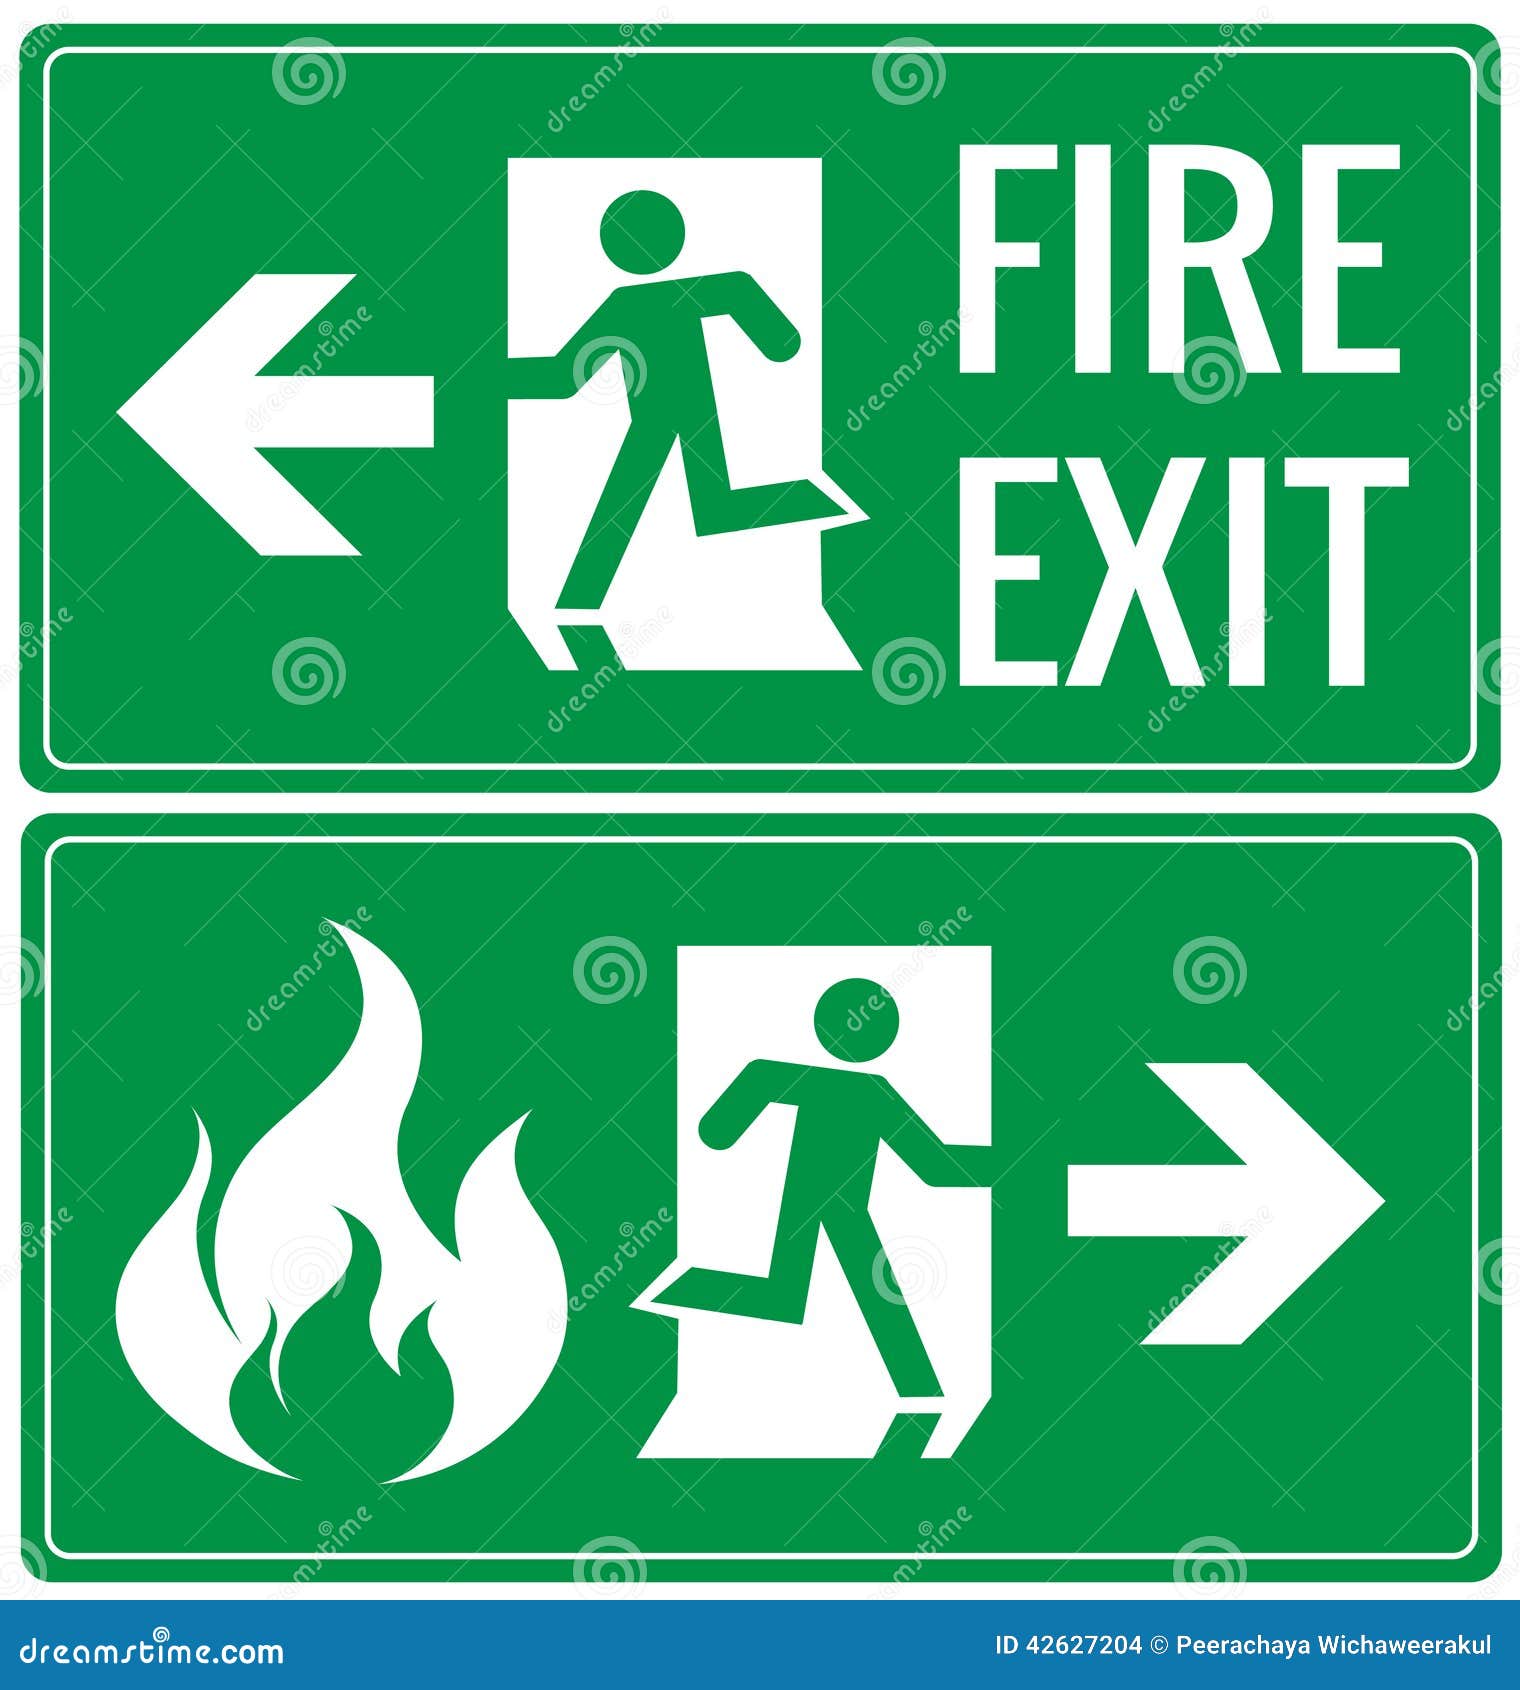 Emergency exit sign man running out fire Vector Image